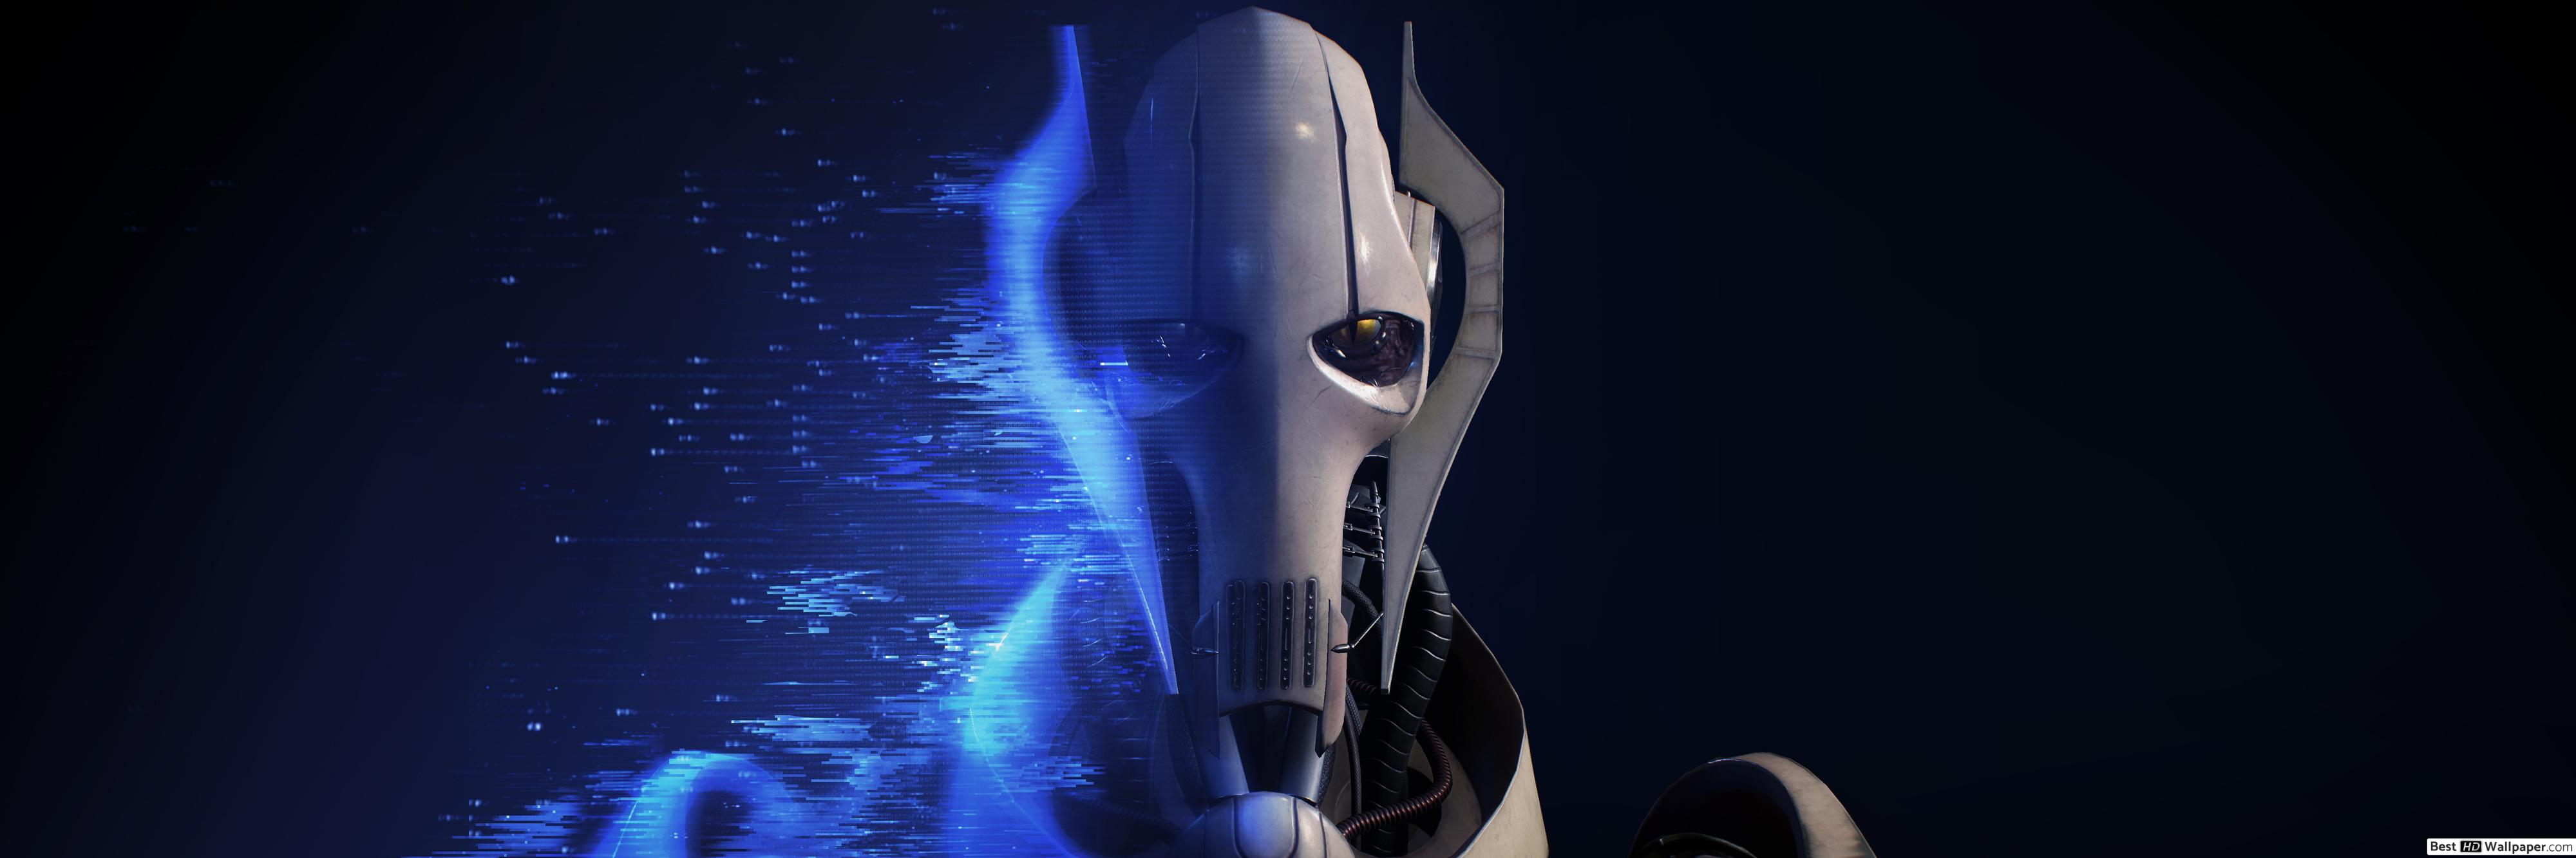 General Grievous Wallpapers 44 images inside